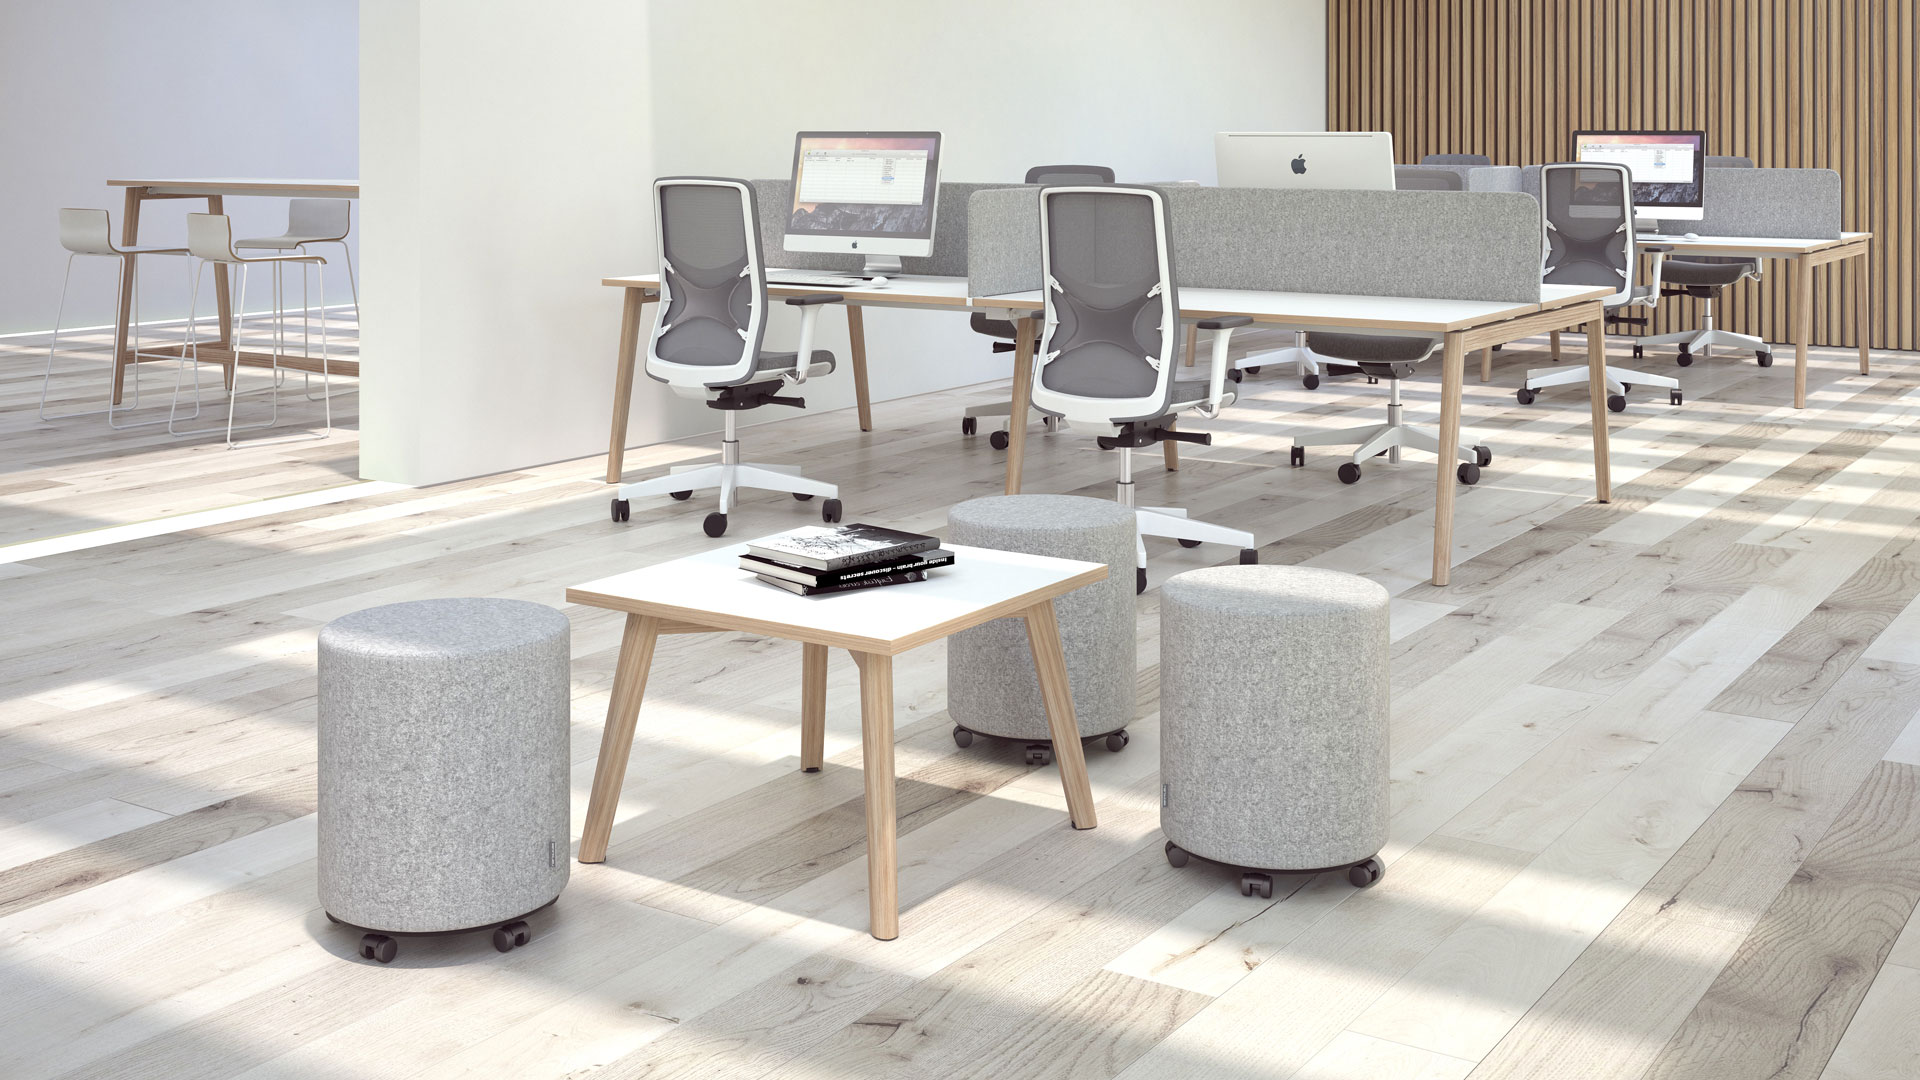 Nova Wood occasional tables are part of the extensive Nova Wood furniture system